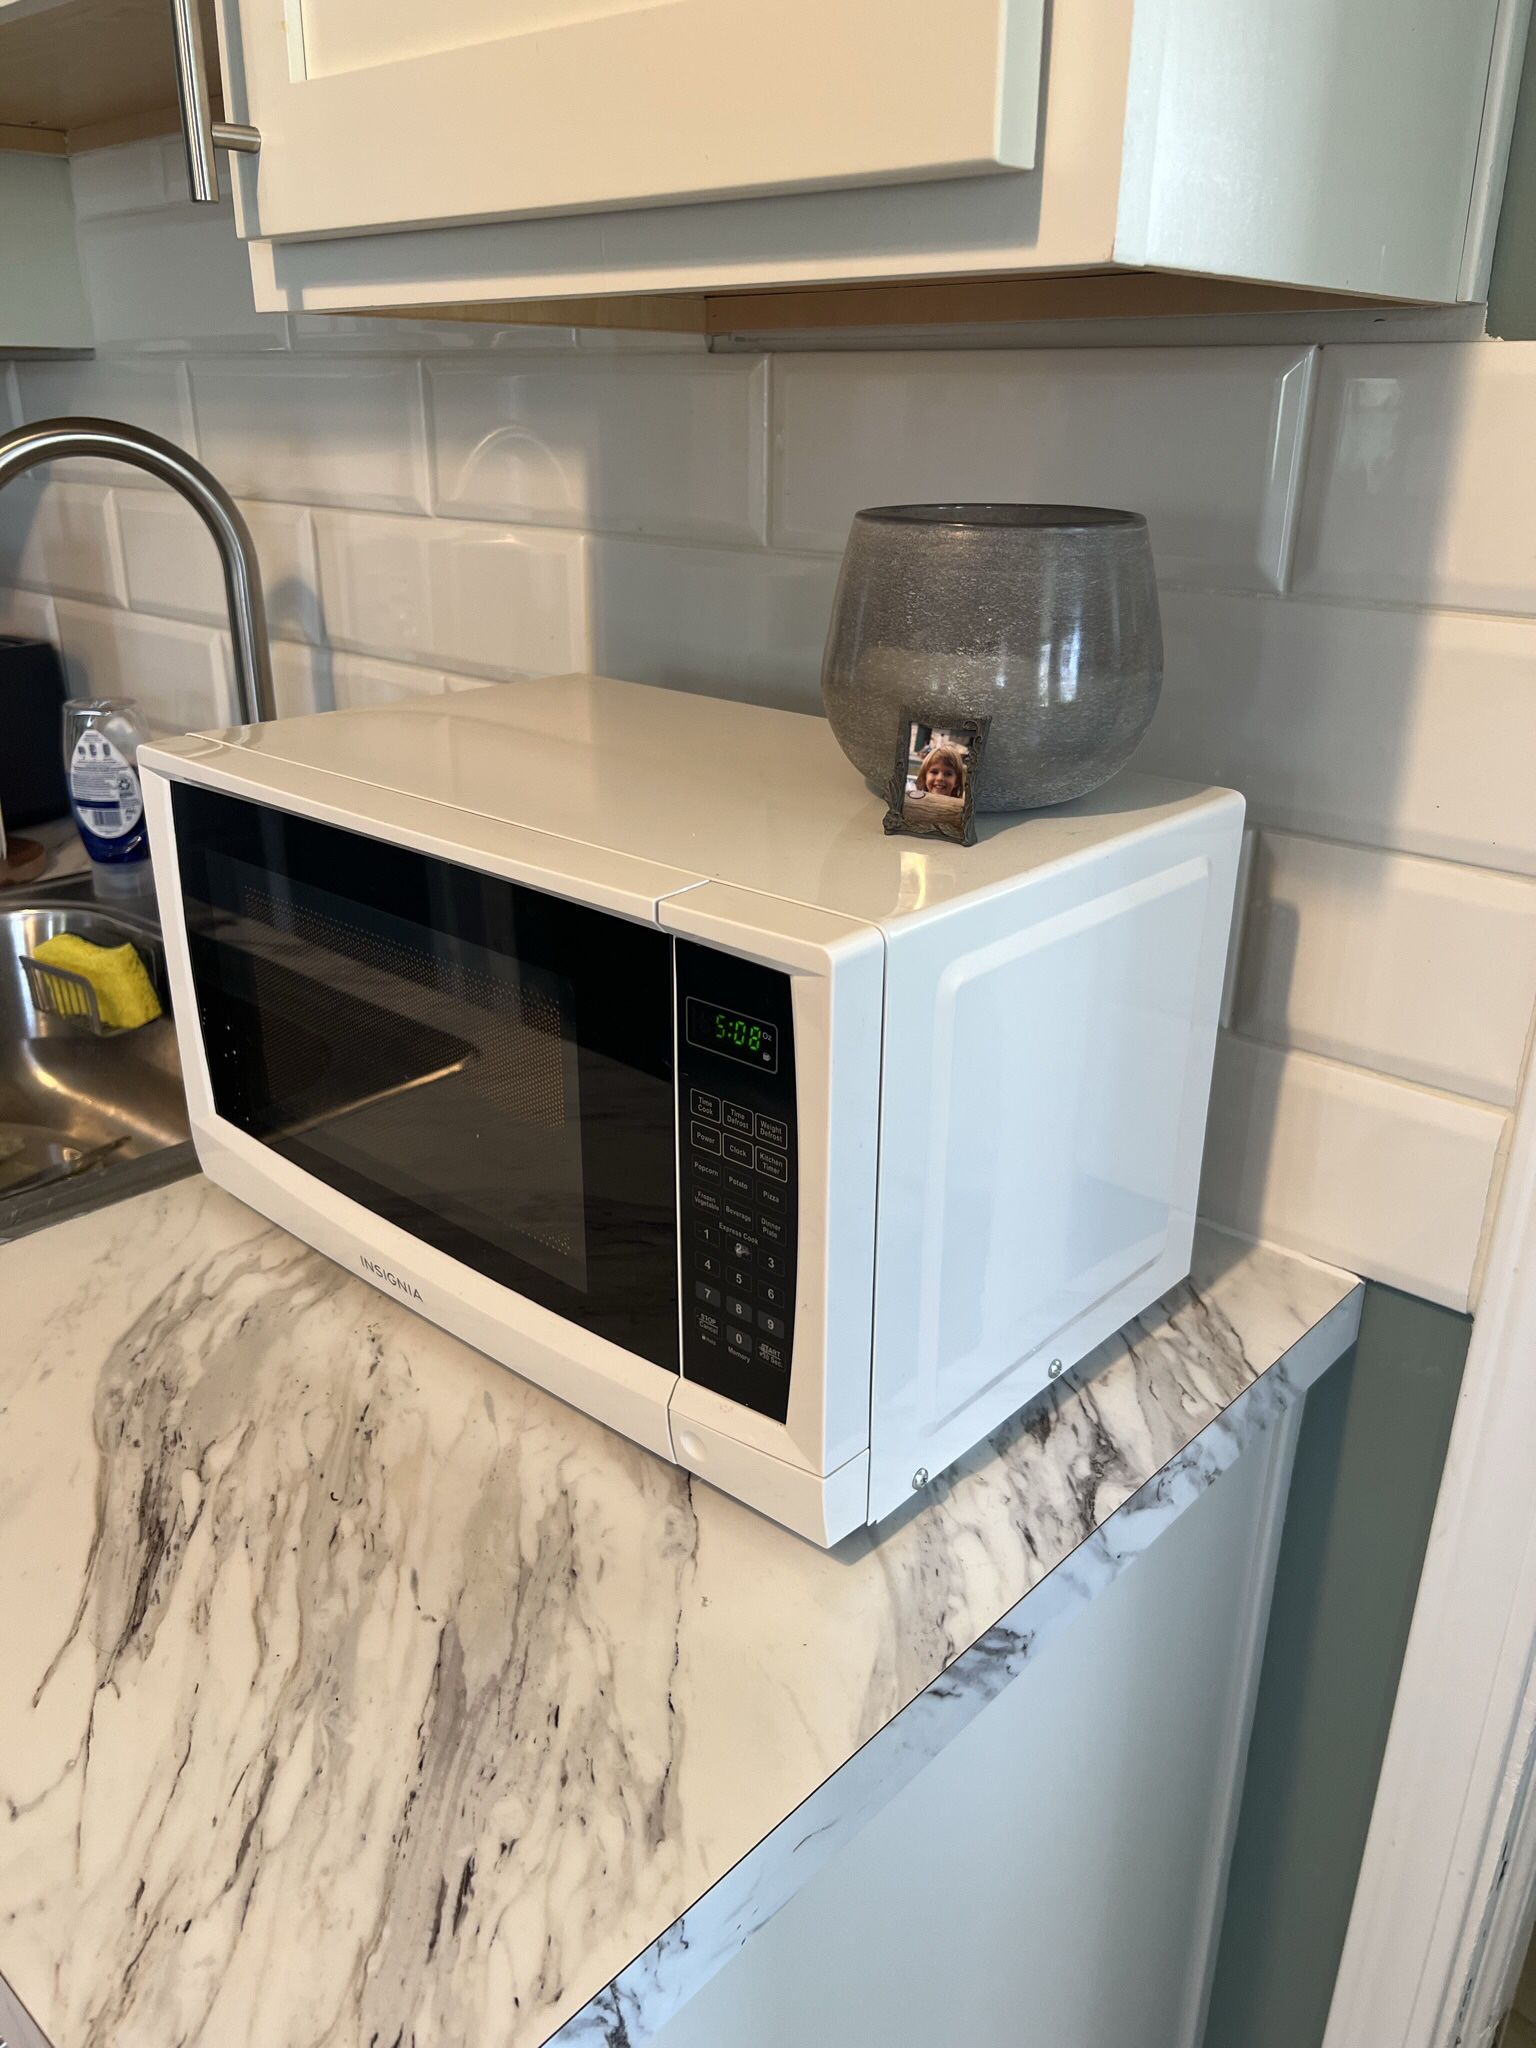 Insignia 0.7 Cu Ft Microwave. Works Great Just No Longer In Need